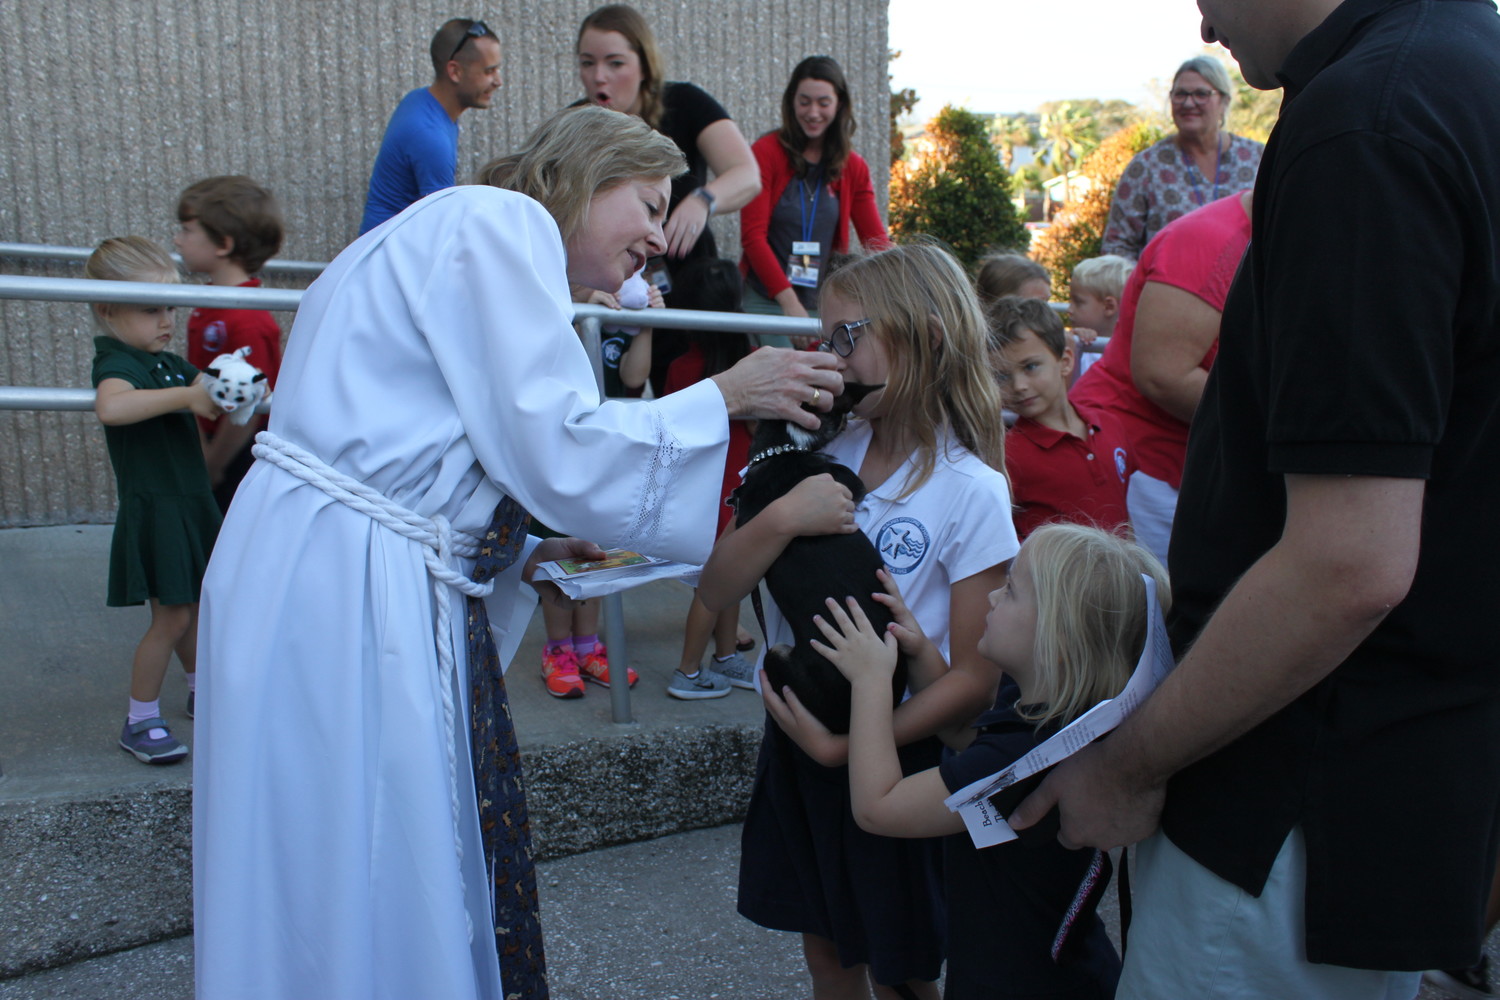 Attendees enjoy Beaches Episcopal’s “Blessing of the Pets.”